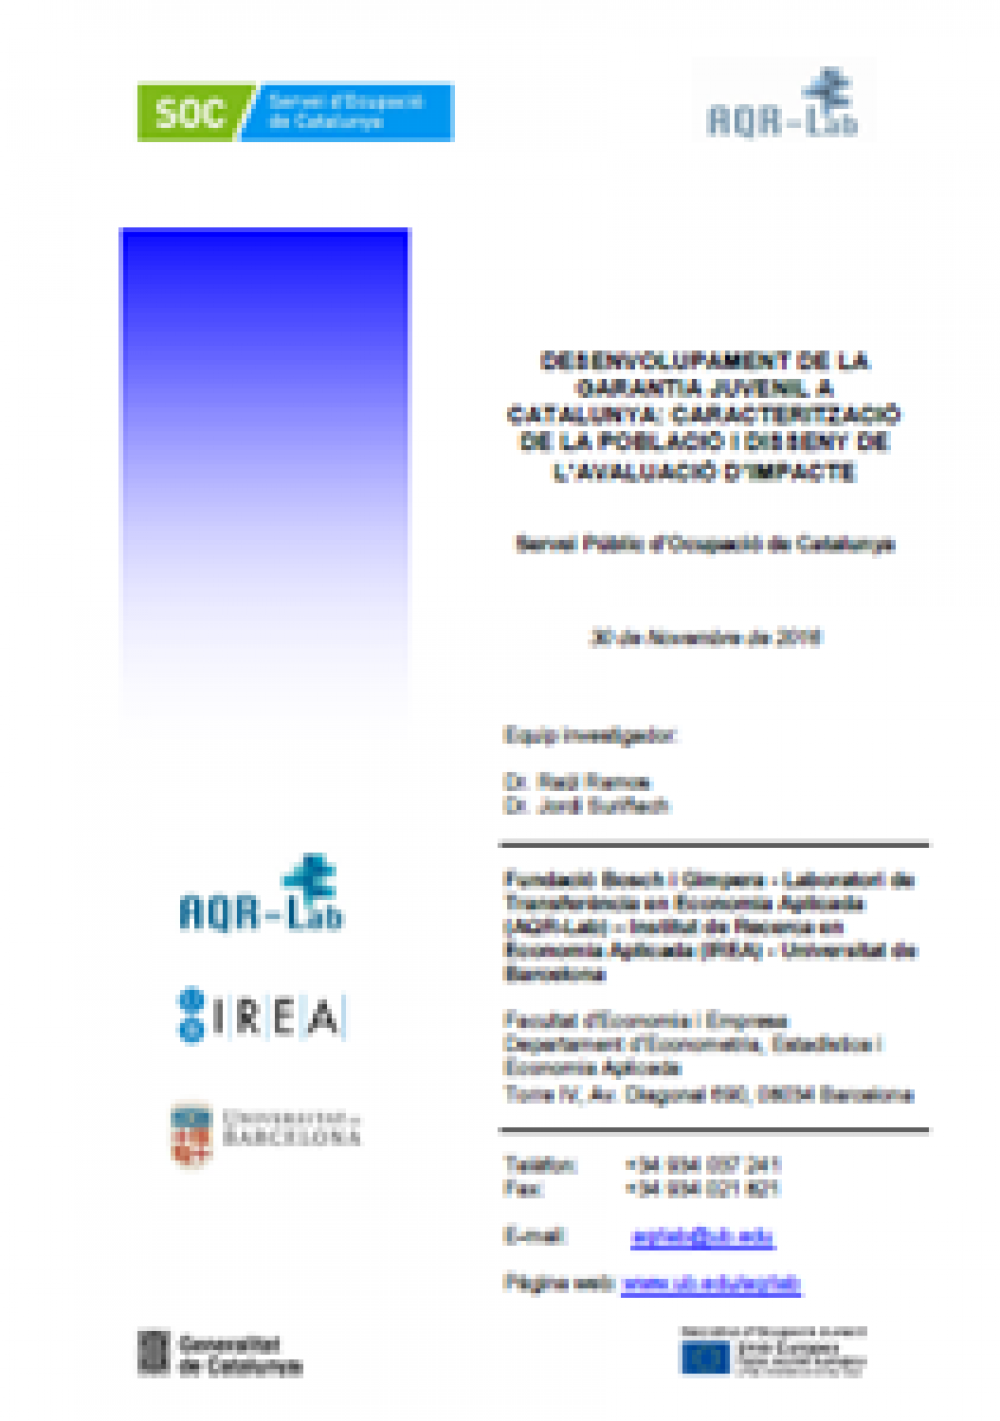 AQR-Lab studdies the ''Development of the juvenile guarantee in Catalonia: Characterisation of the population and design of the evaluation of impact.''